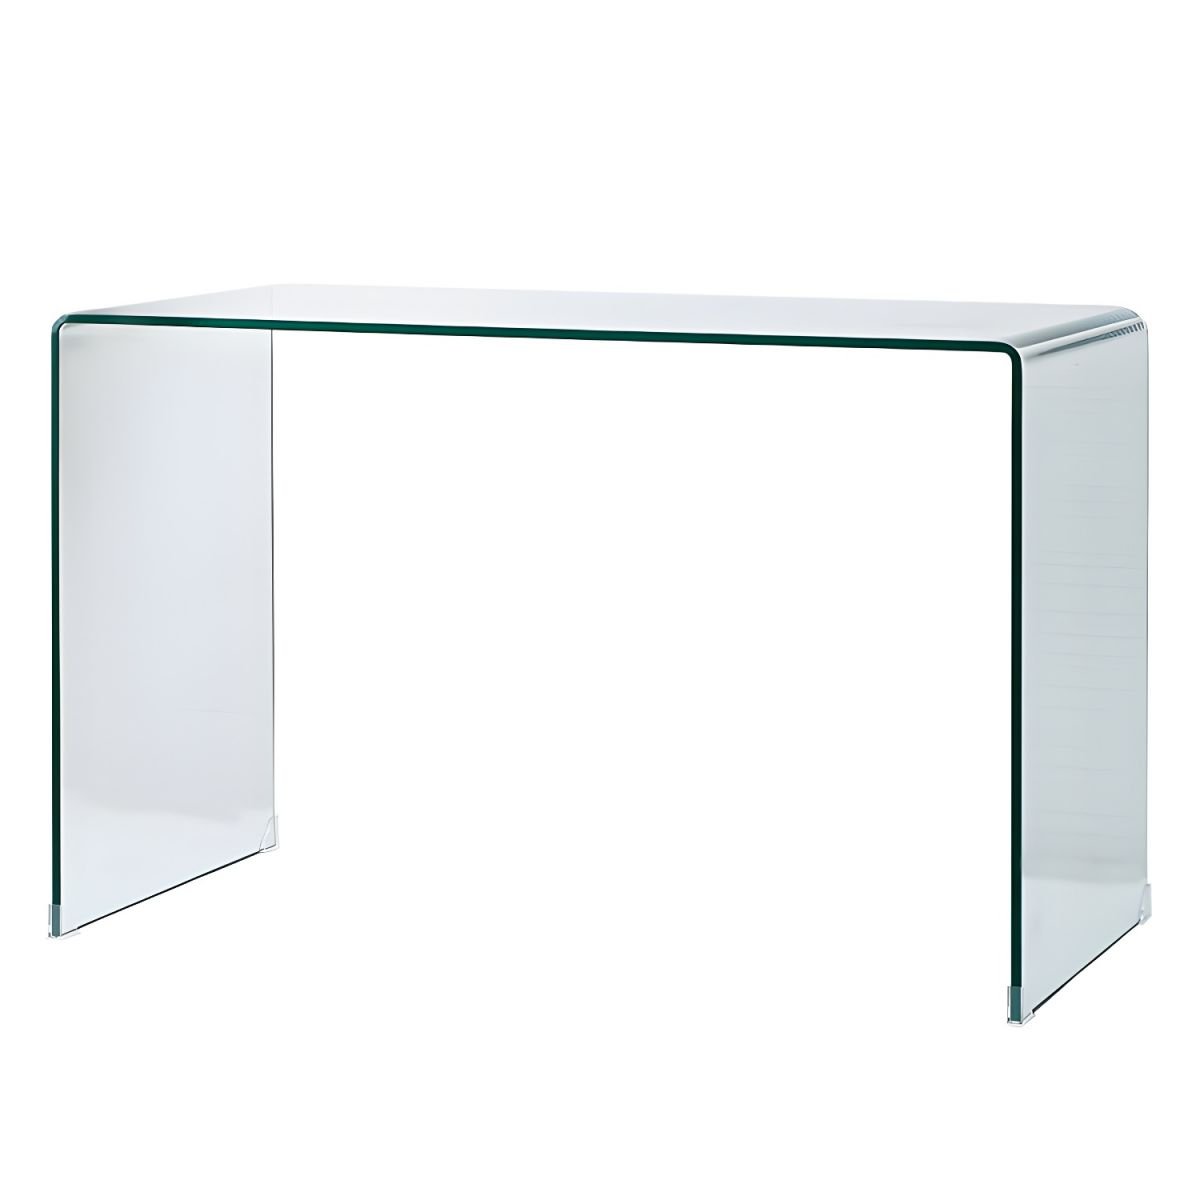 Modern Simple Style Standard Dressing Table Glass Rectangle in Translucent, 35"L x 16"W x 30"H